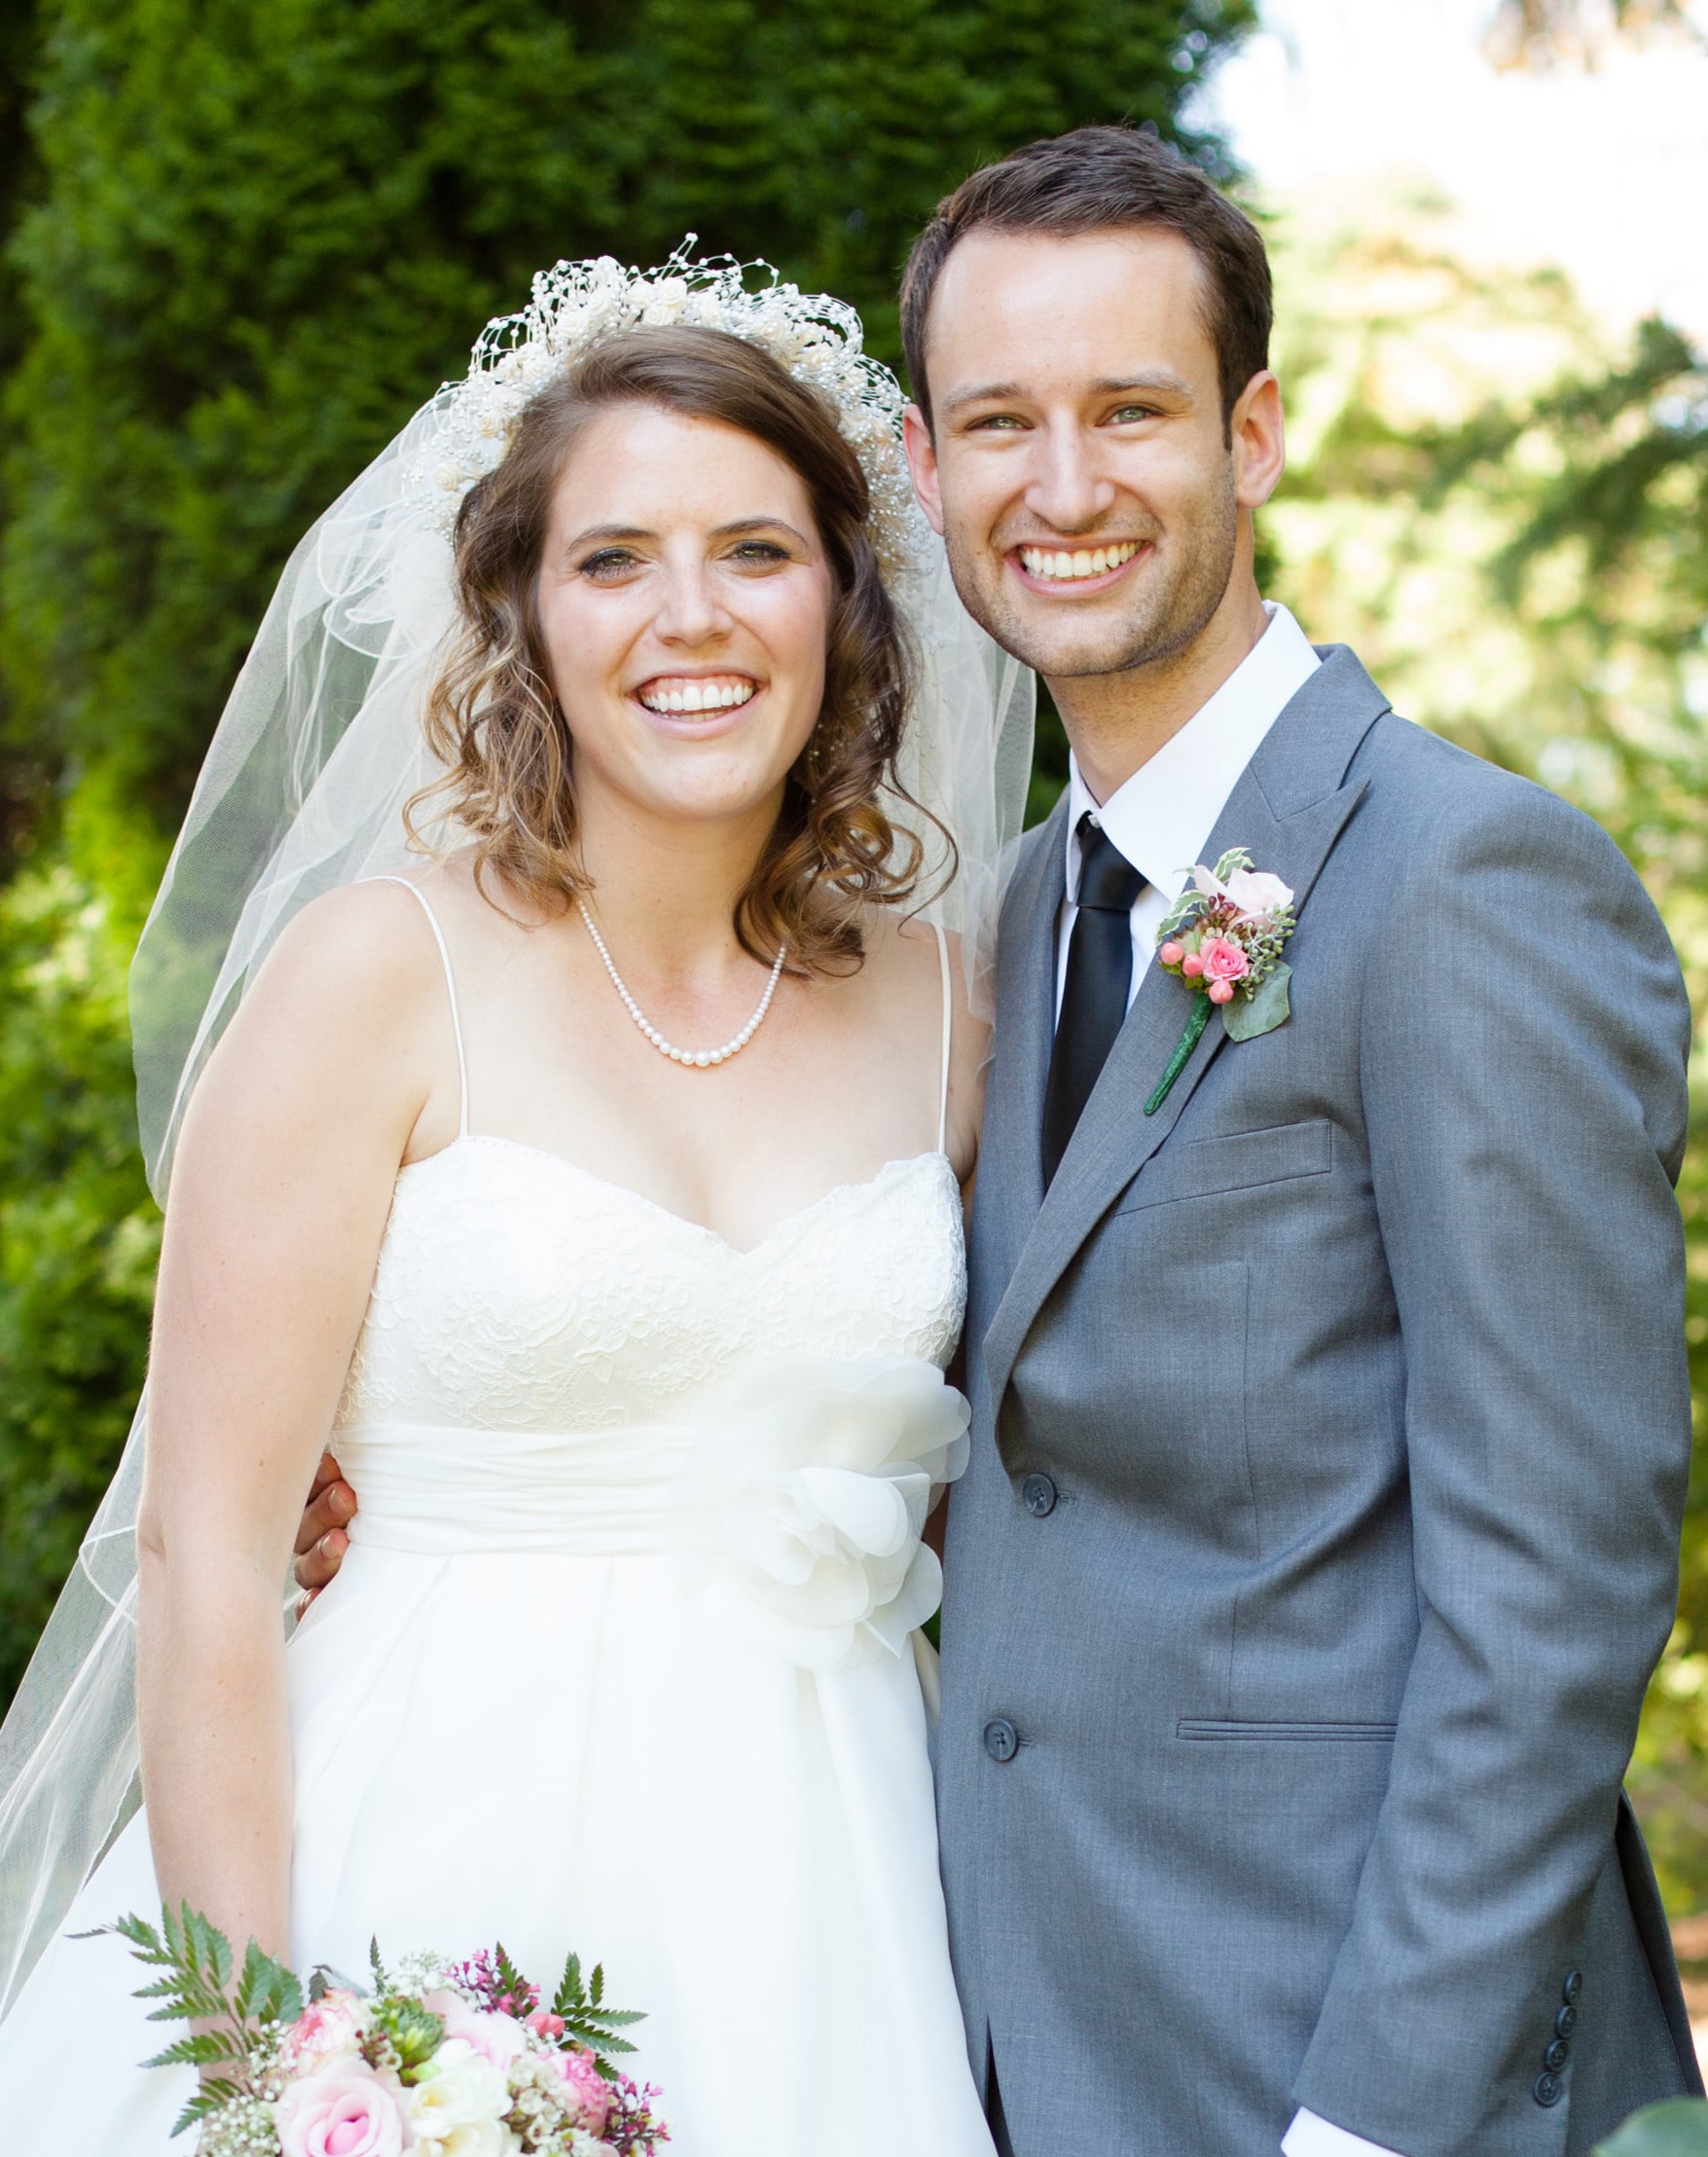 Jessica Lynn Russau, of Damascus, Oregon, and James William Heberling, of Camas, were married July 31, 2015, at Lucy's Garden in Ridgefield. Dr. James Avey officiated.